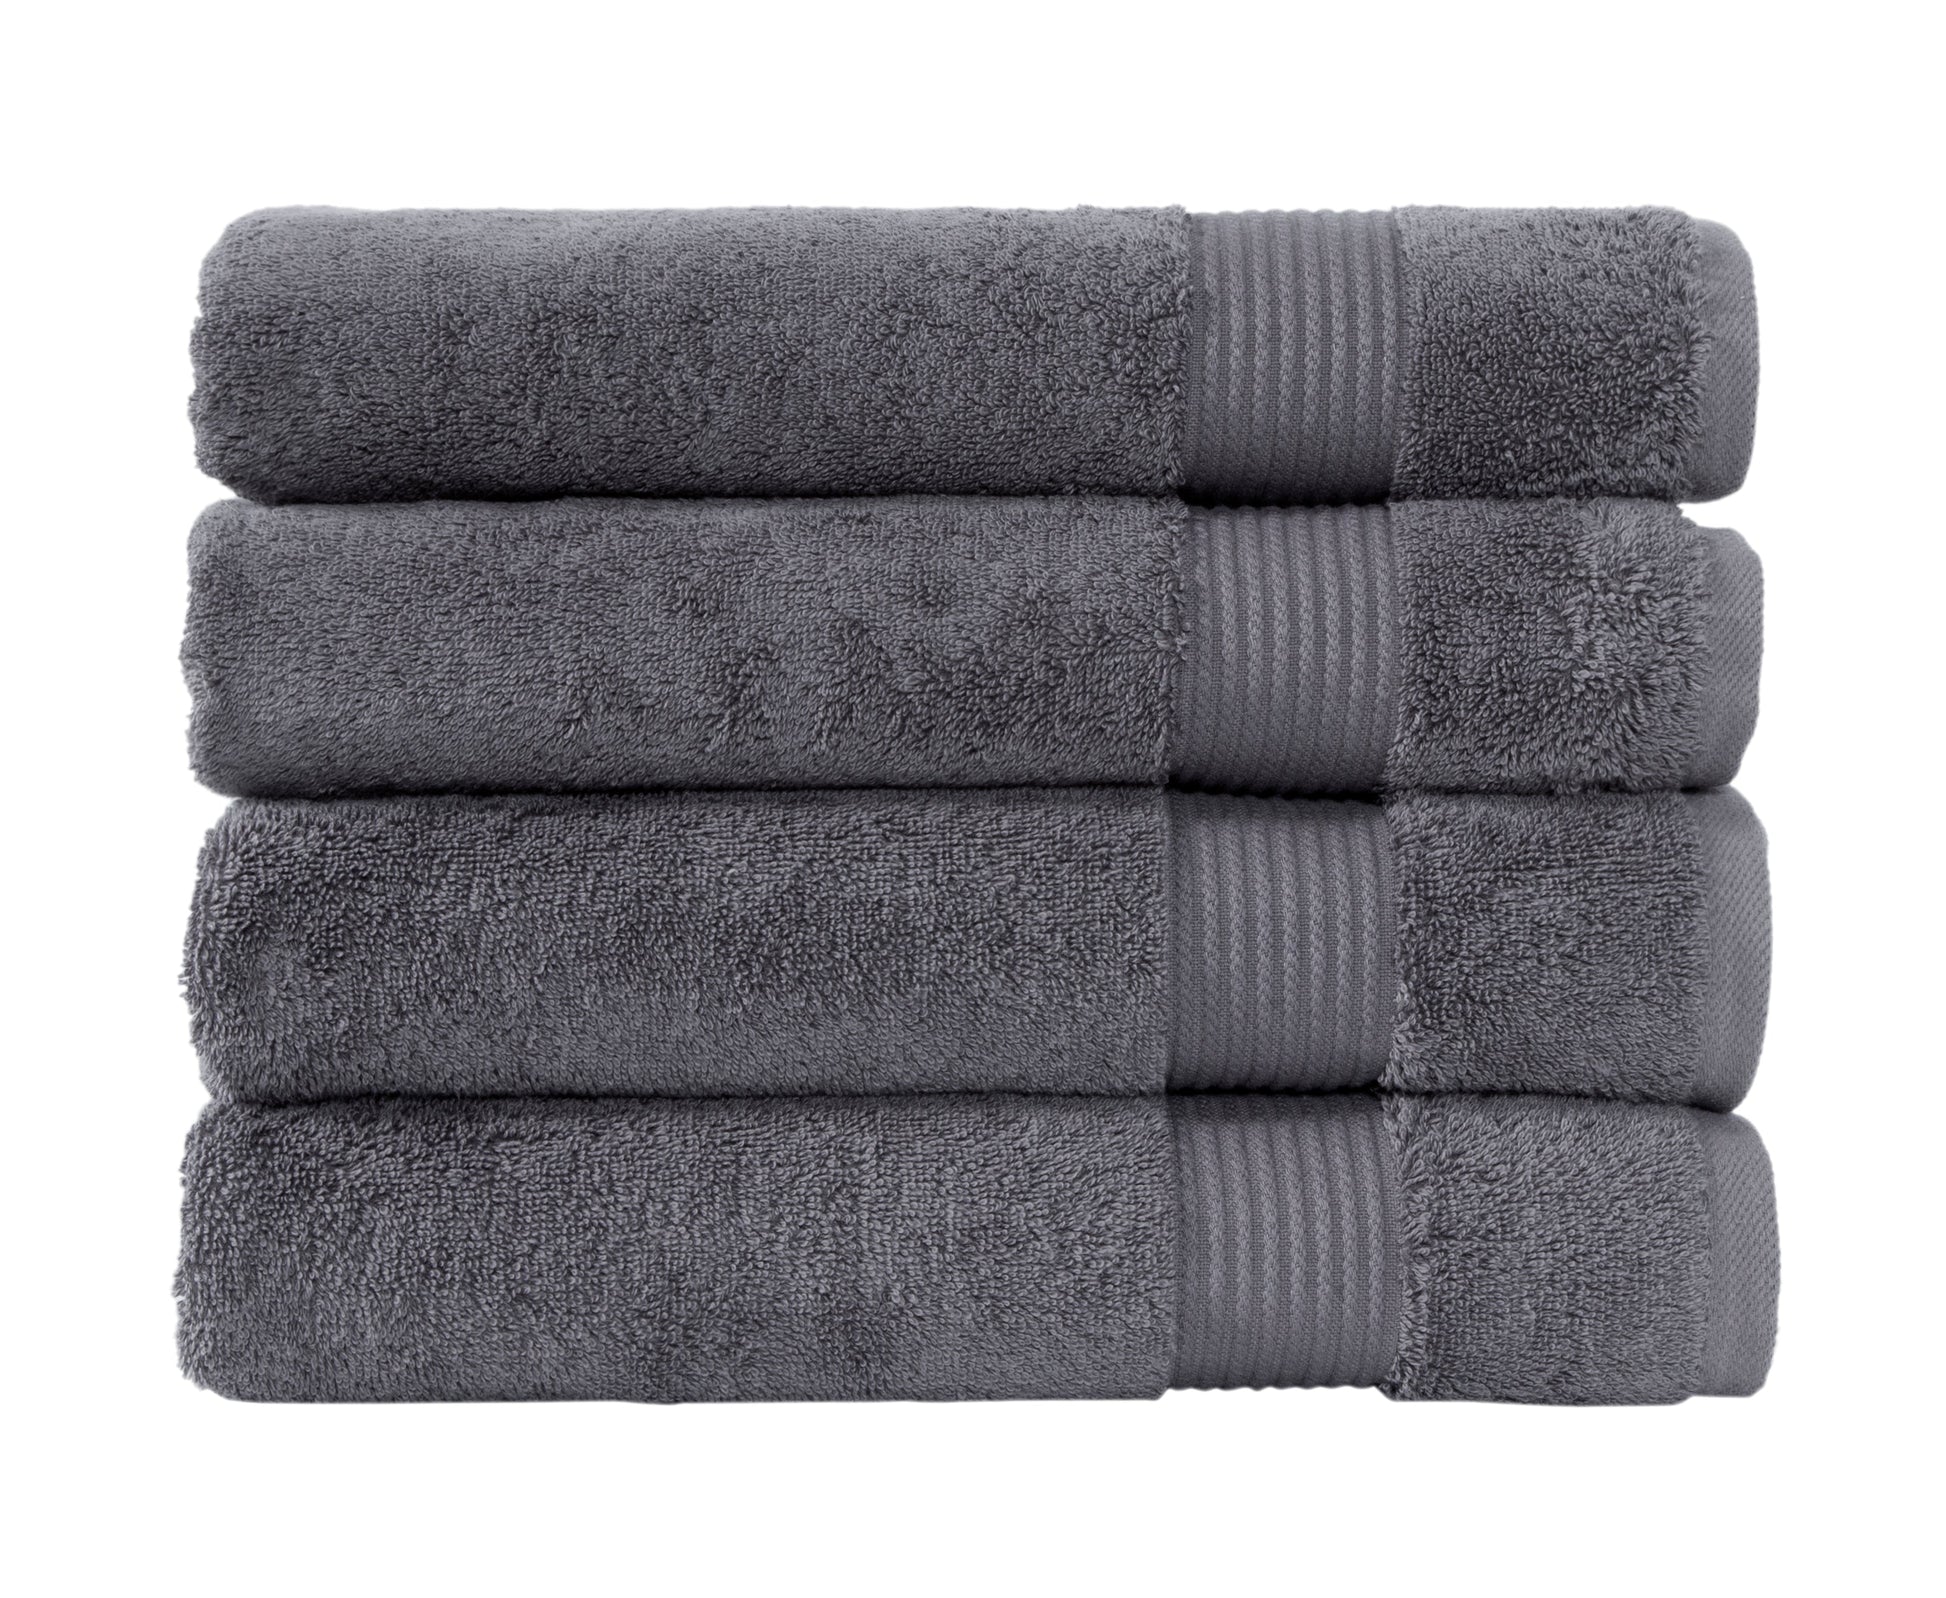 Purchase Delicious hotel balfour towels turkish cotton For Amazing Meals 